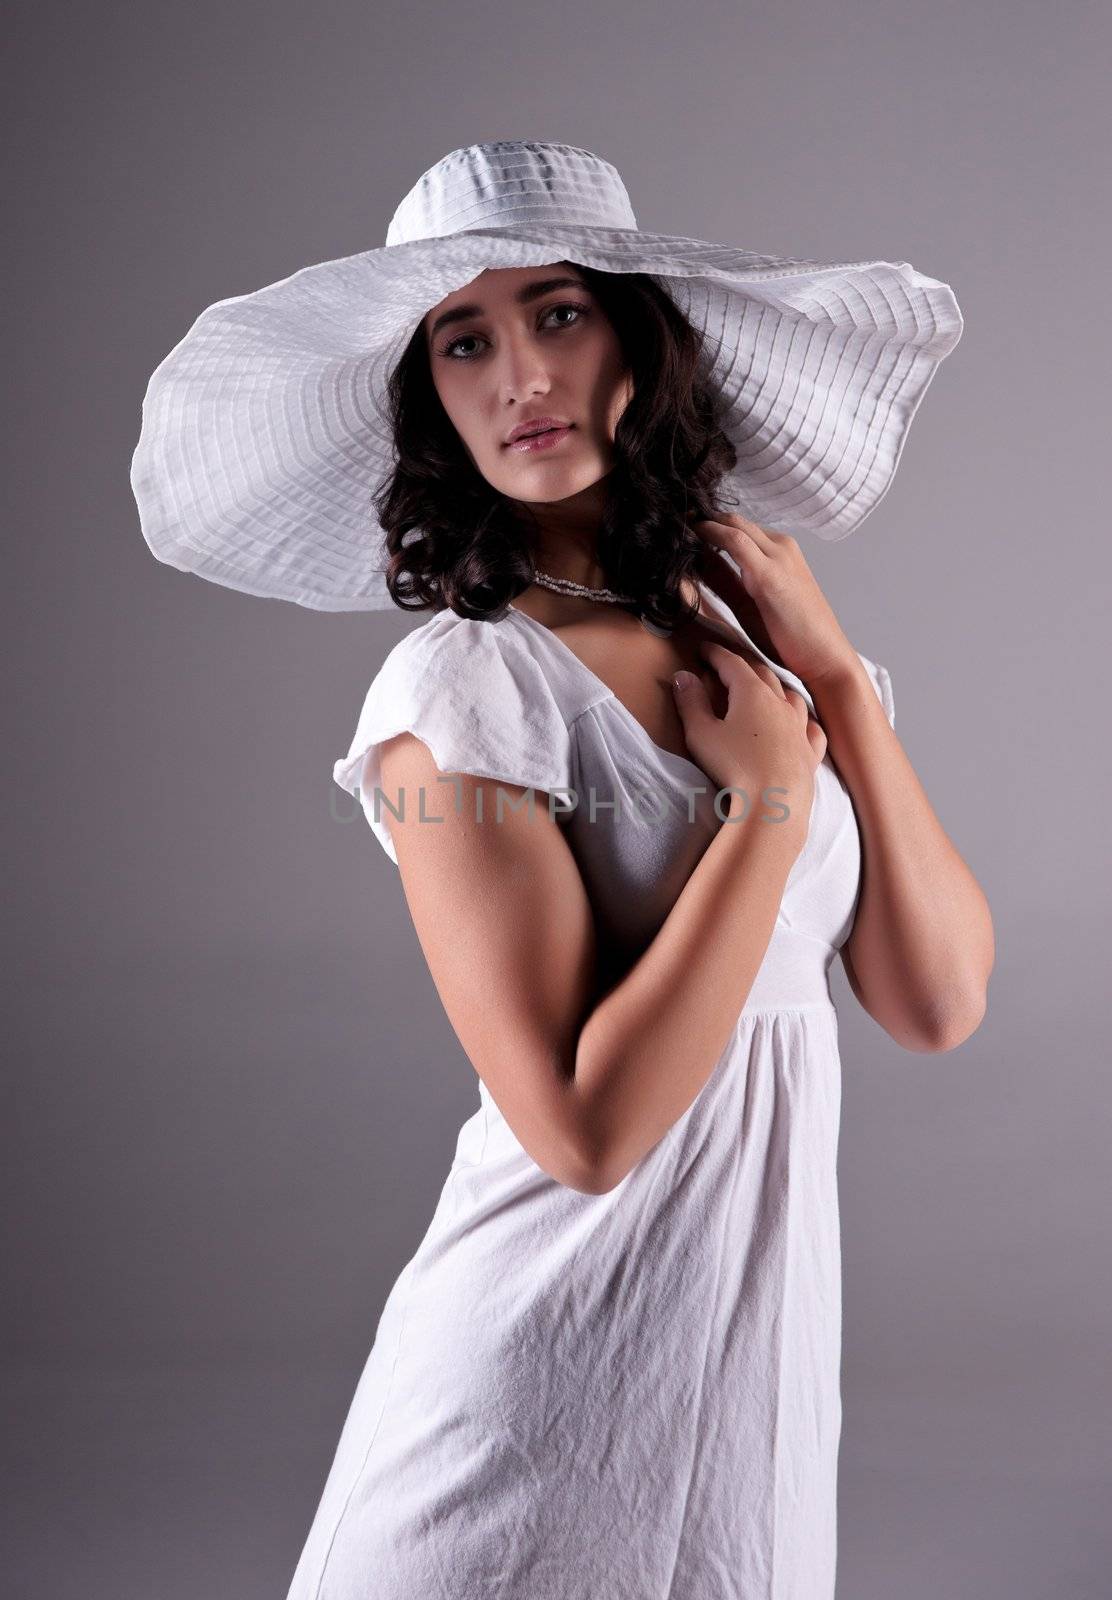 beautiful fashion model in white dress and hat on gray